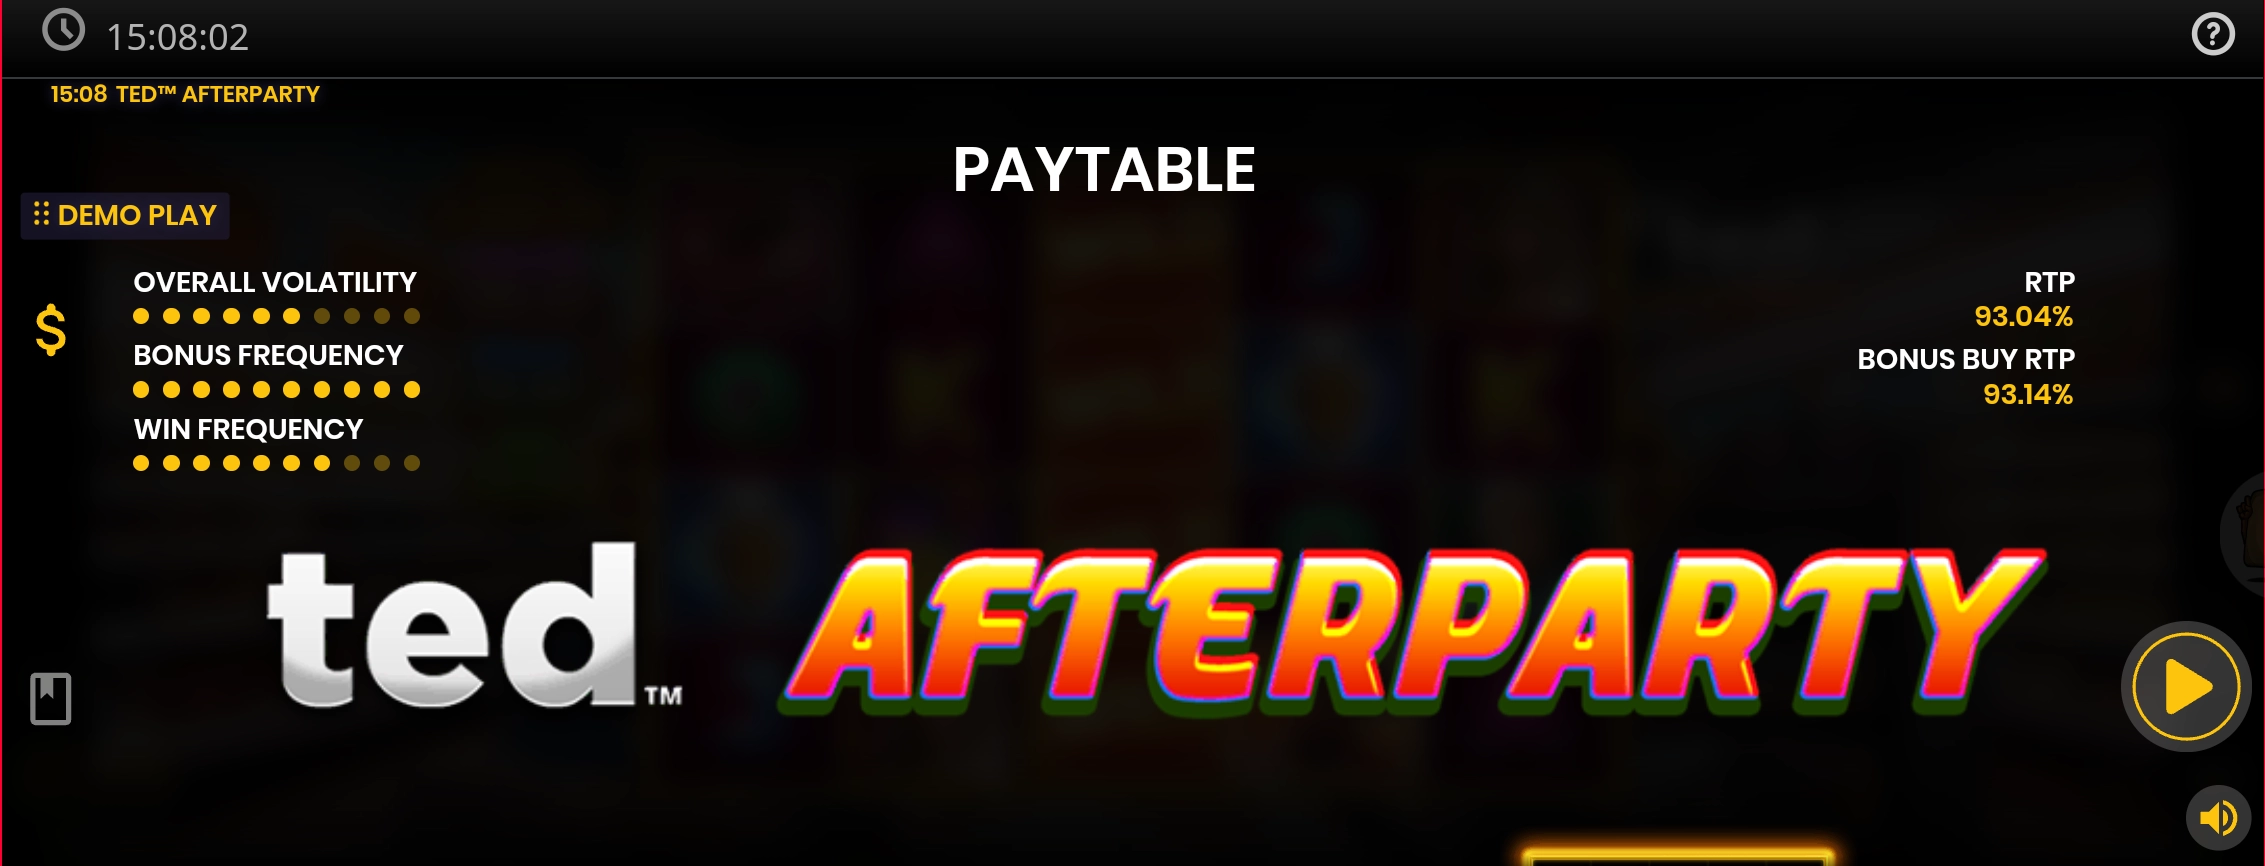 Ted 2 Afterparty Paytable